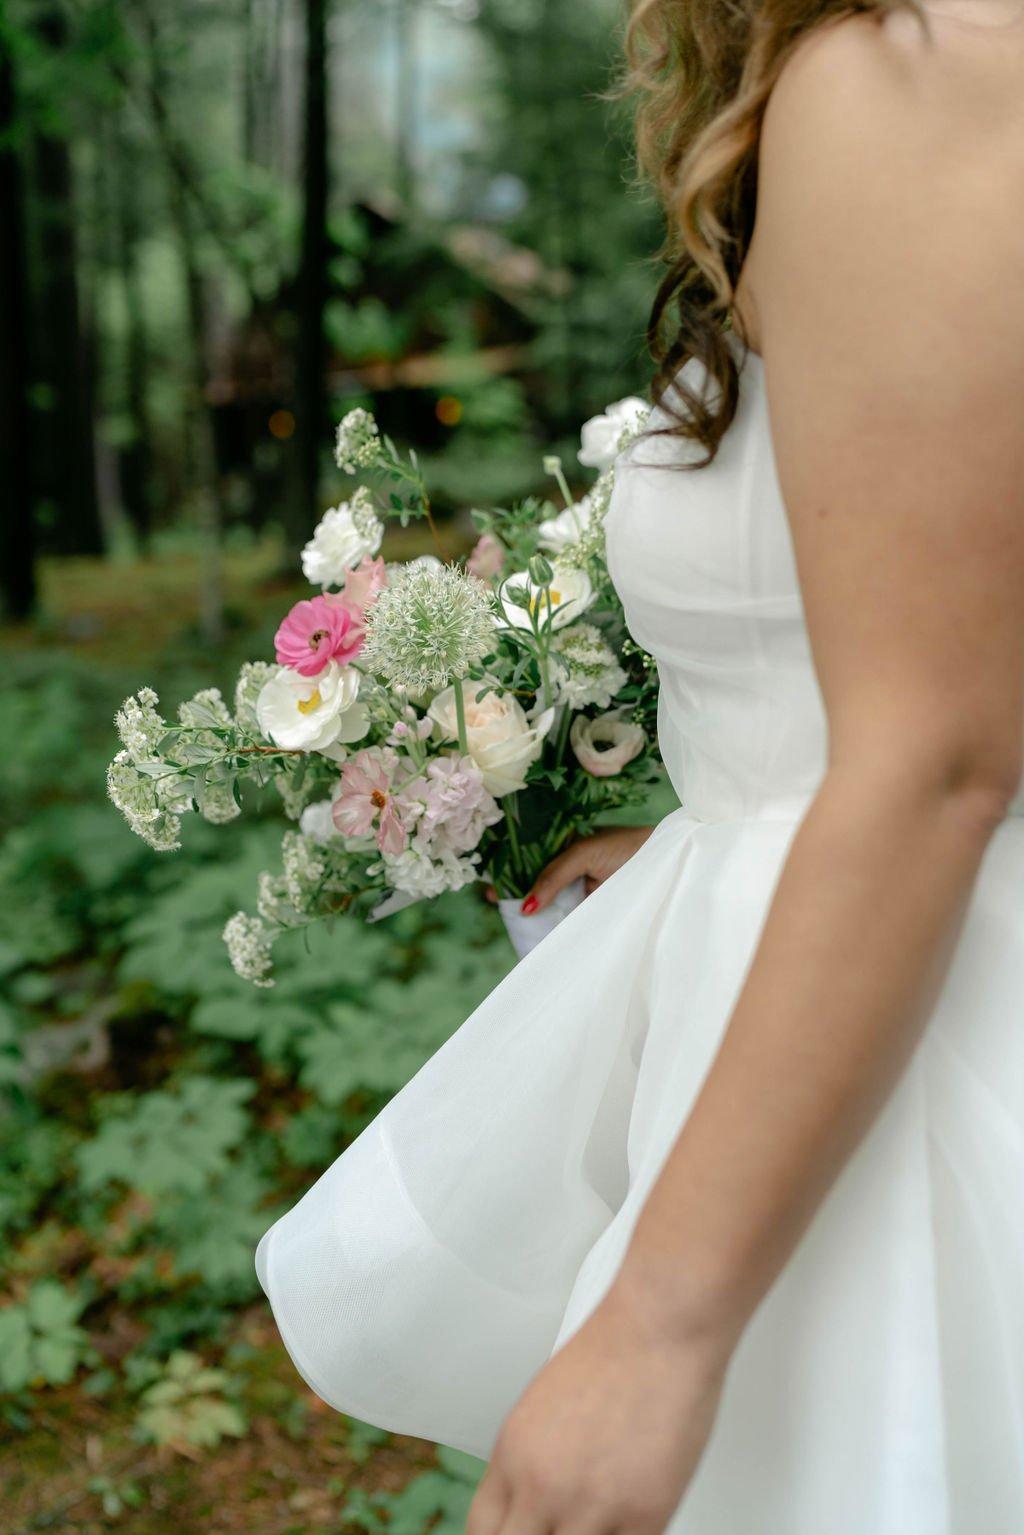 May Bridal Bouquet Featuring Seasonal Blooms